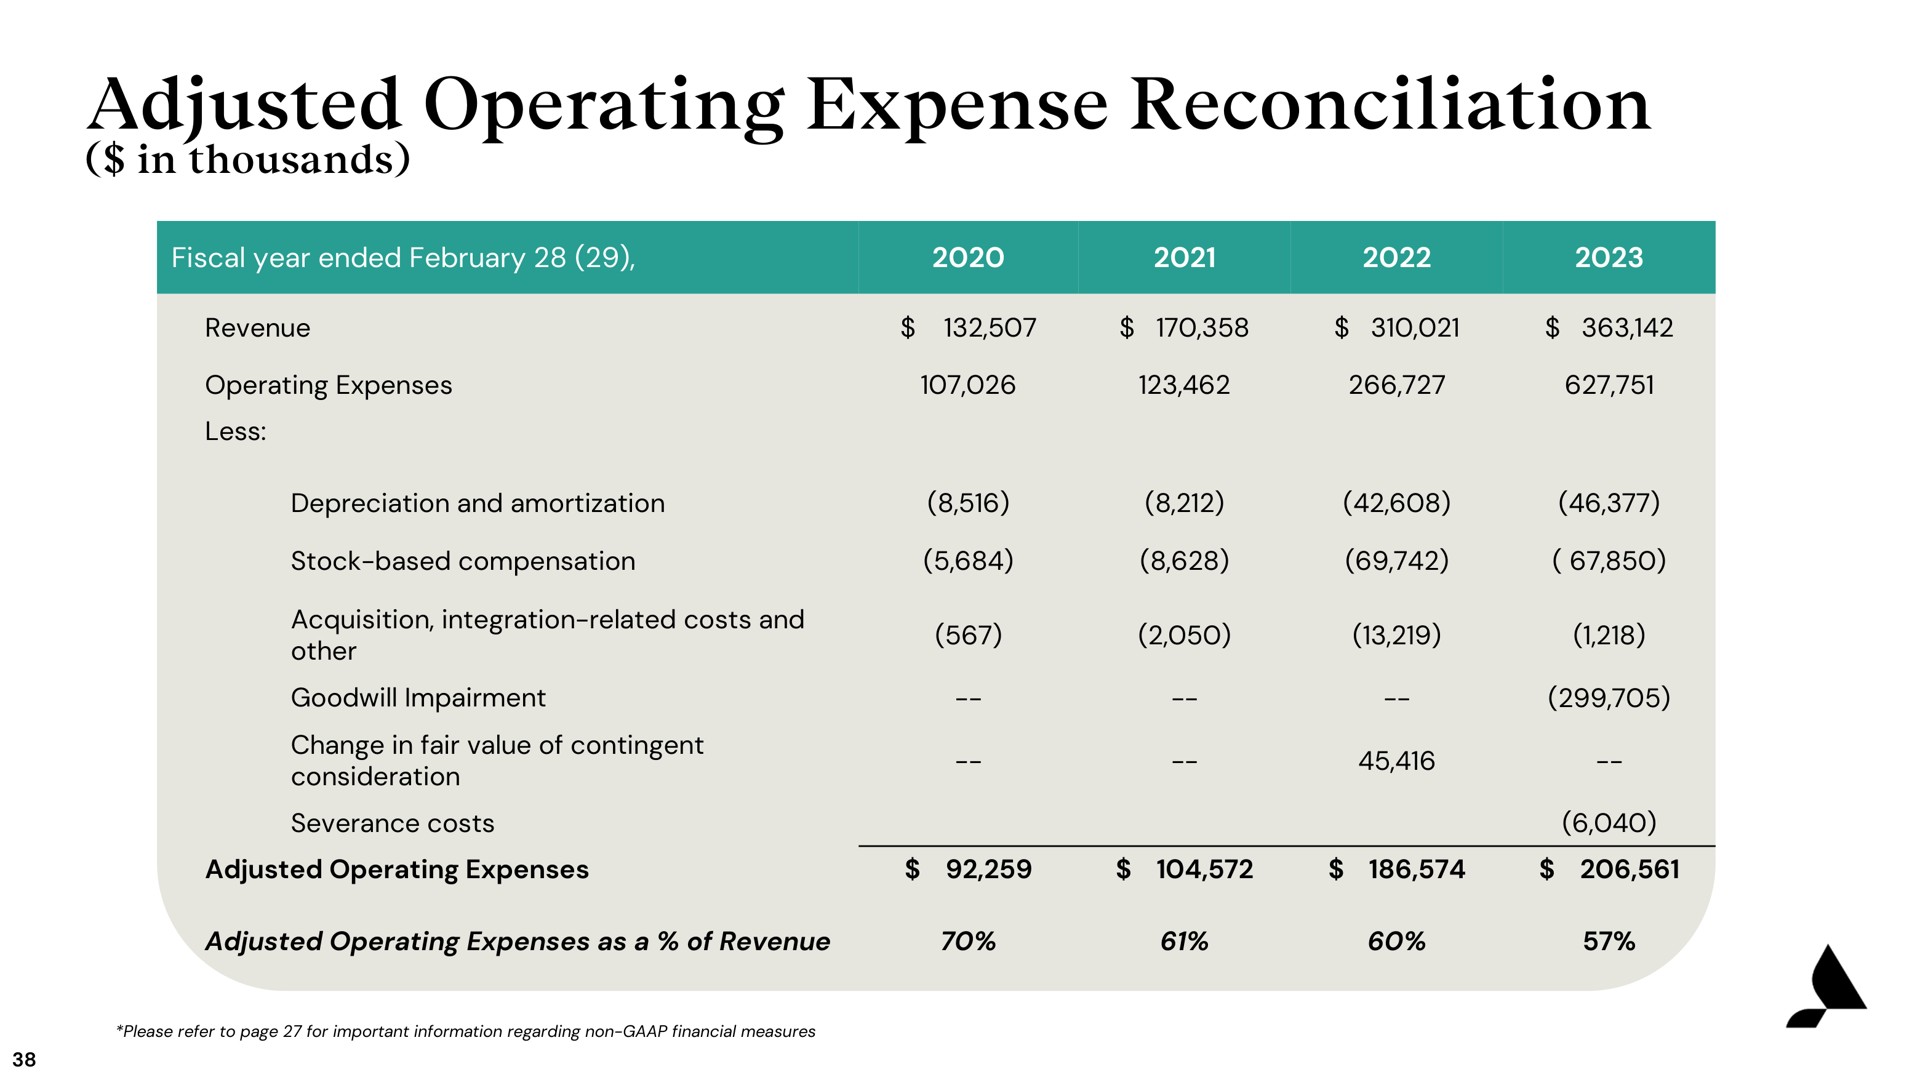 adjusted operating expense reconciliation | Accolade